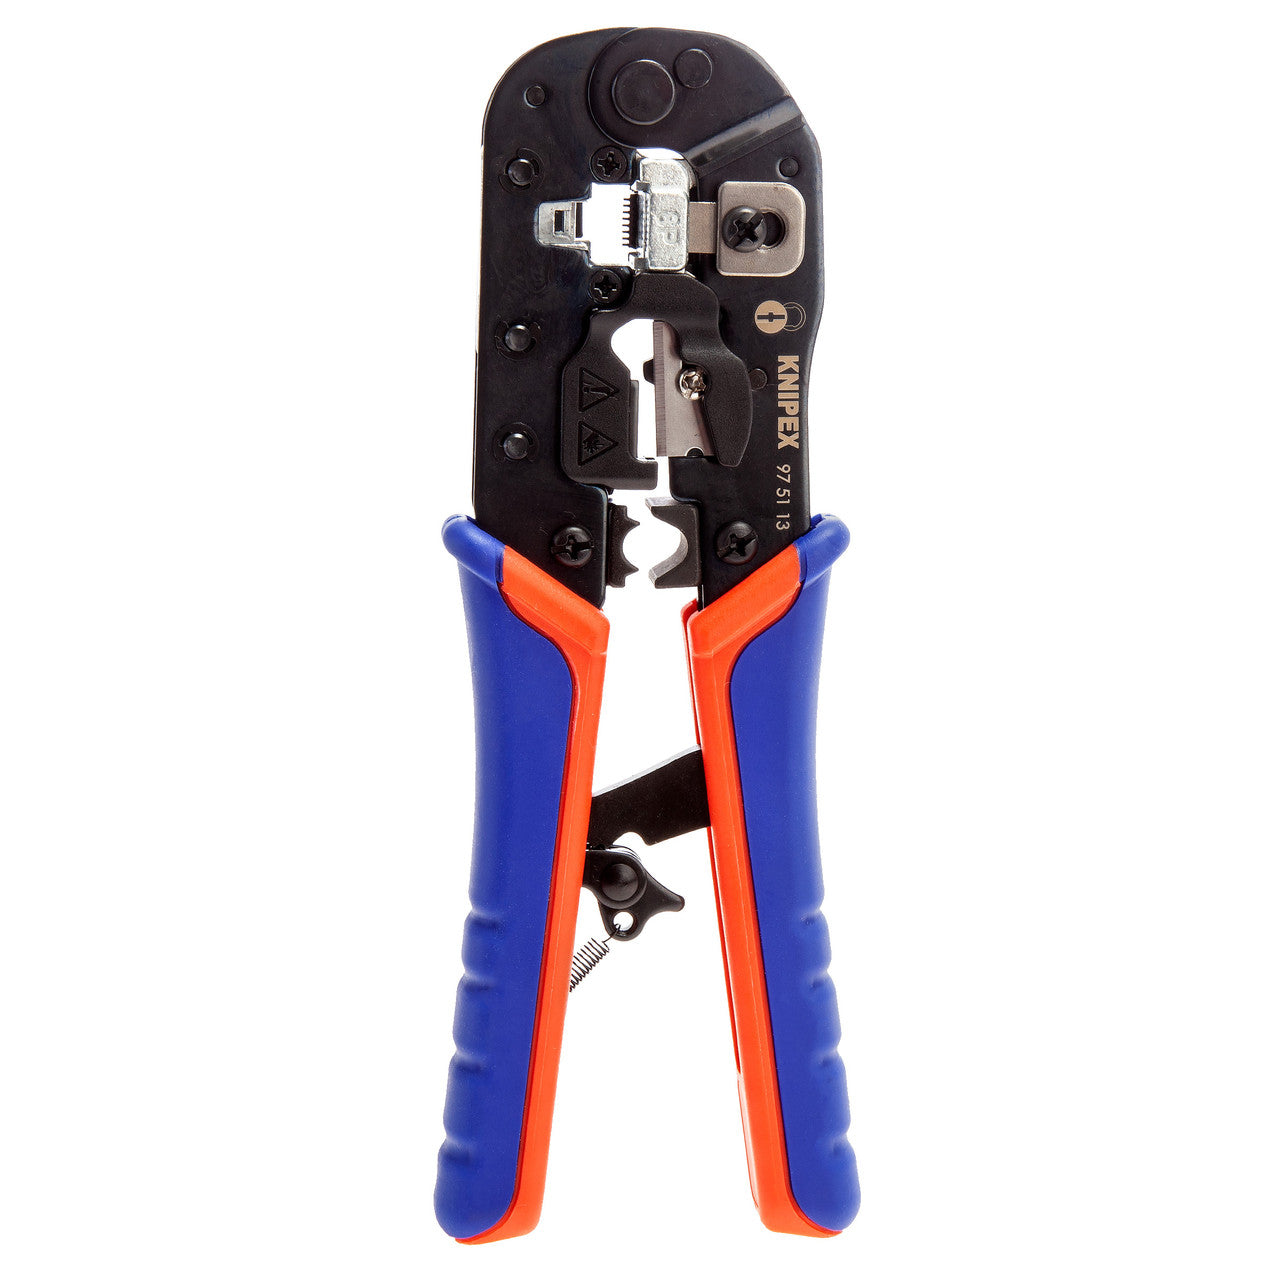 Knipex 975113 Crimping Pliers for RJ45 Western Plugs 190mm